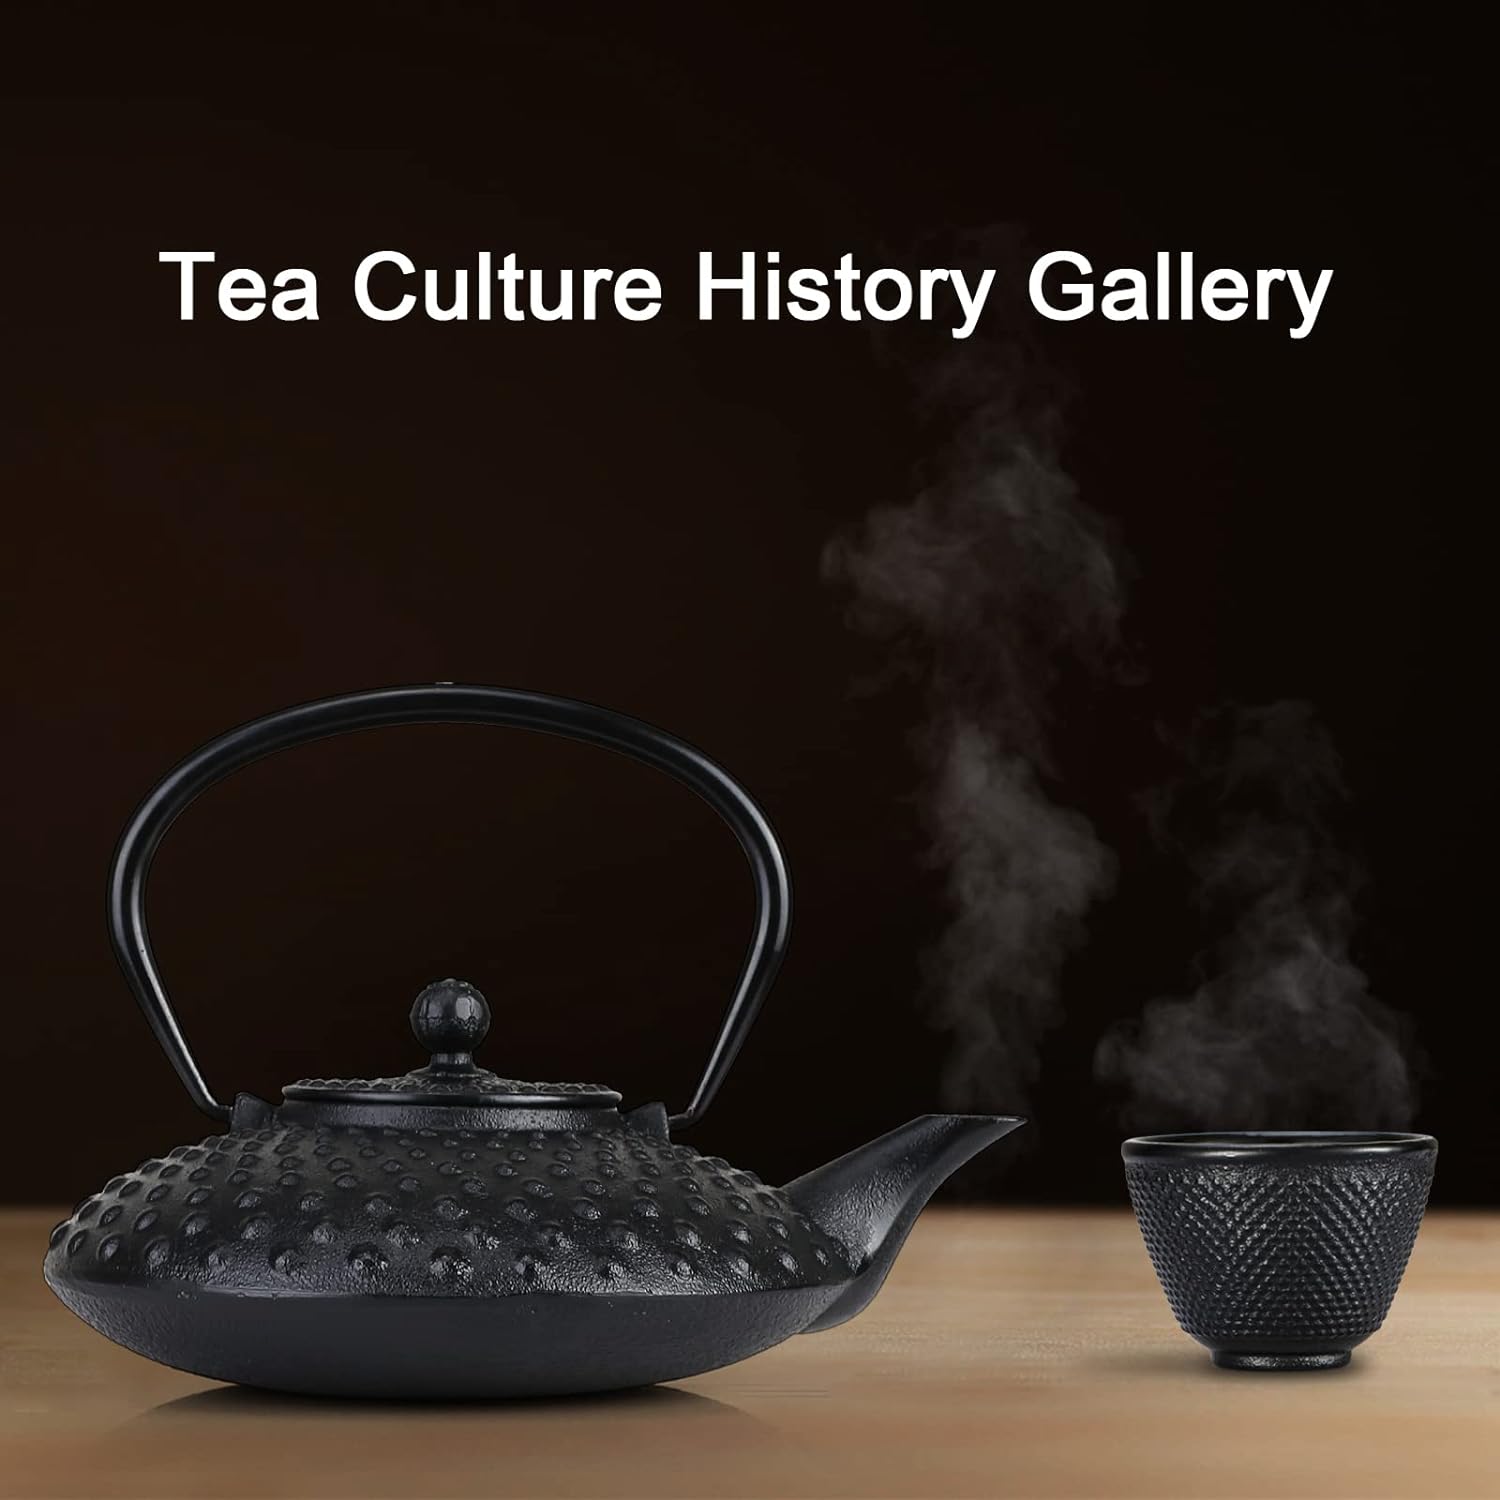 Vobeiy Japanese Cast Iron Teapot Asian Tea Pot with Removable Stainless Steel Strainer, Japanese Style Tea Kettle Base and 2 Cups